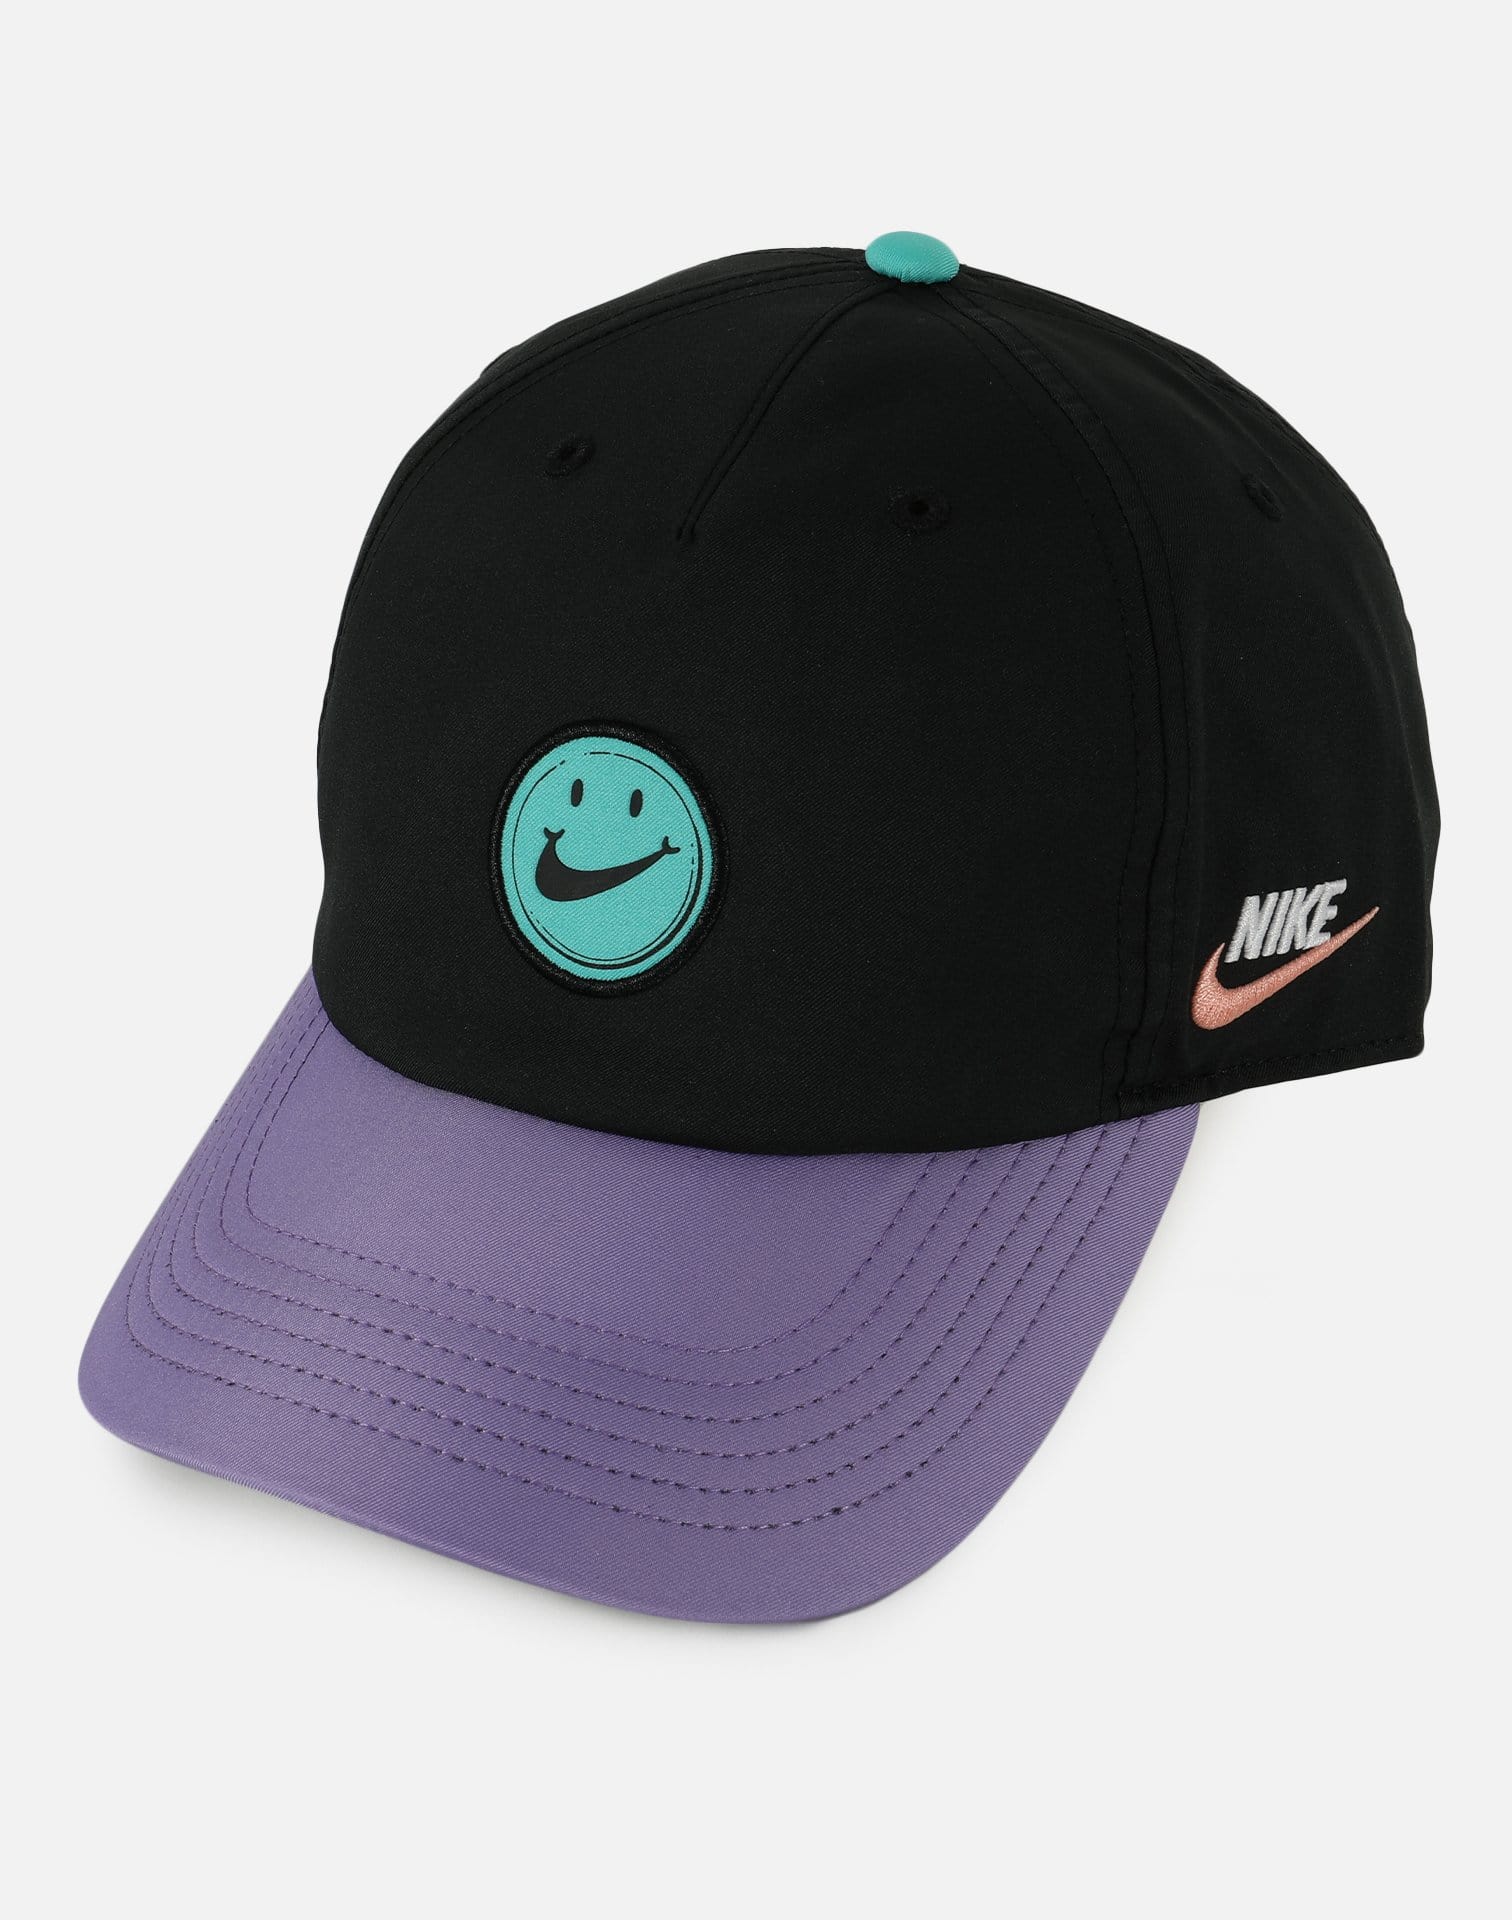 have a nike day cap